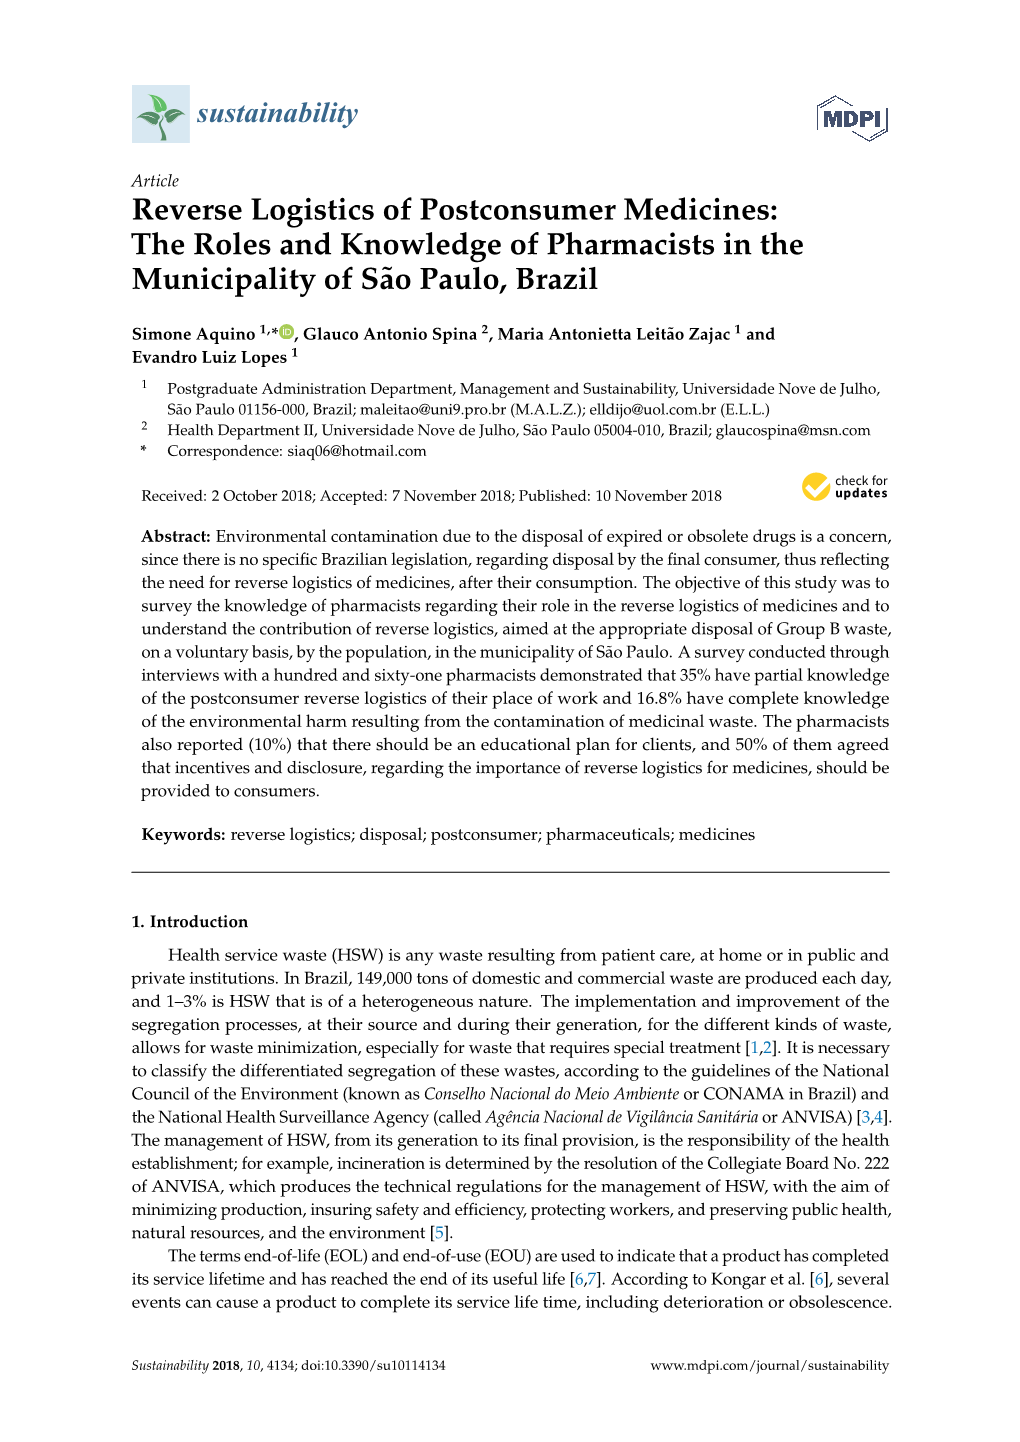 Reverse Logistics of Postconsumer Medicines: the Roles and Knowledge of Pharmacists in the Municipality of São Paulo, Brazil